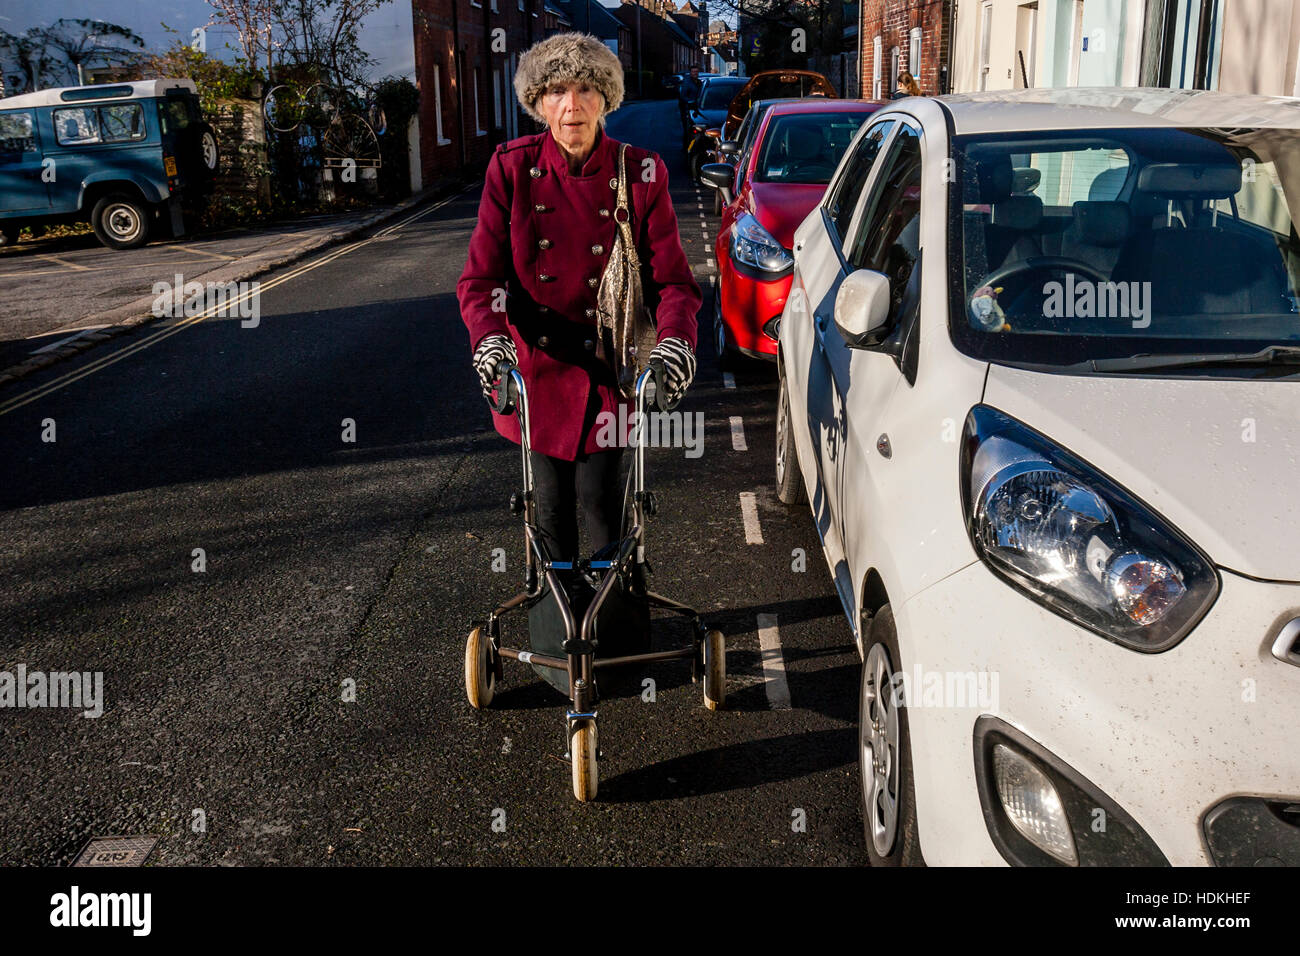 An Elderly Disabled Woman Walking With Her Rollator, Lewes, Sussex, UK Stock Photo